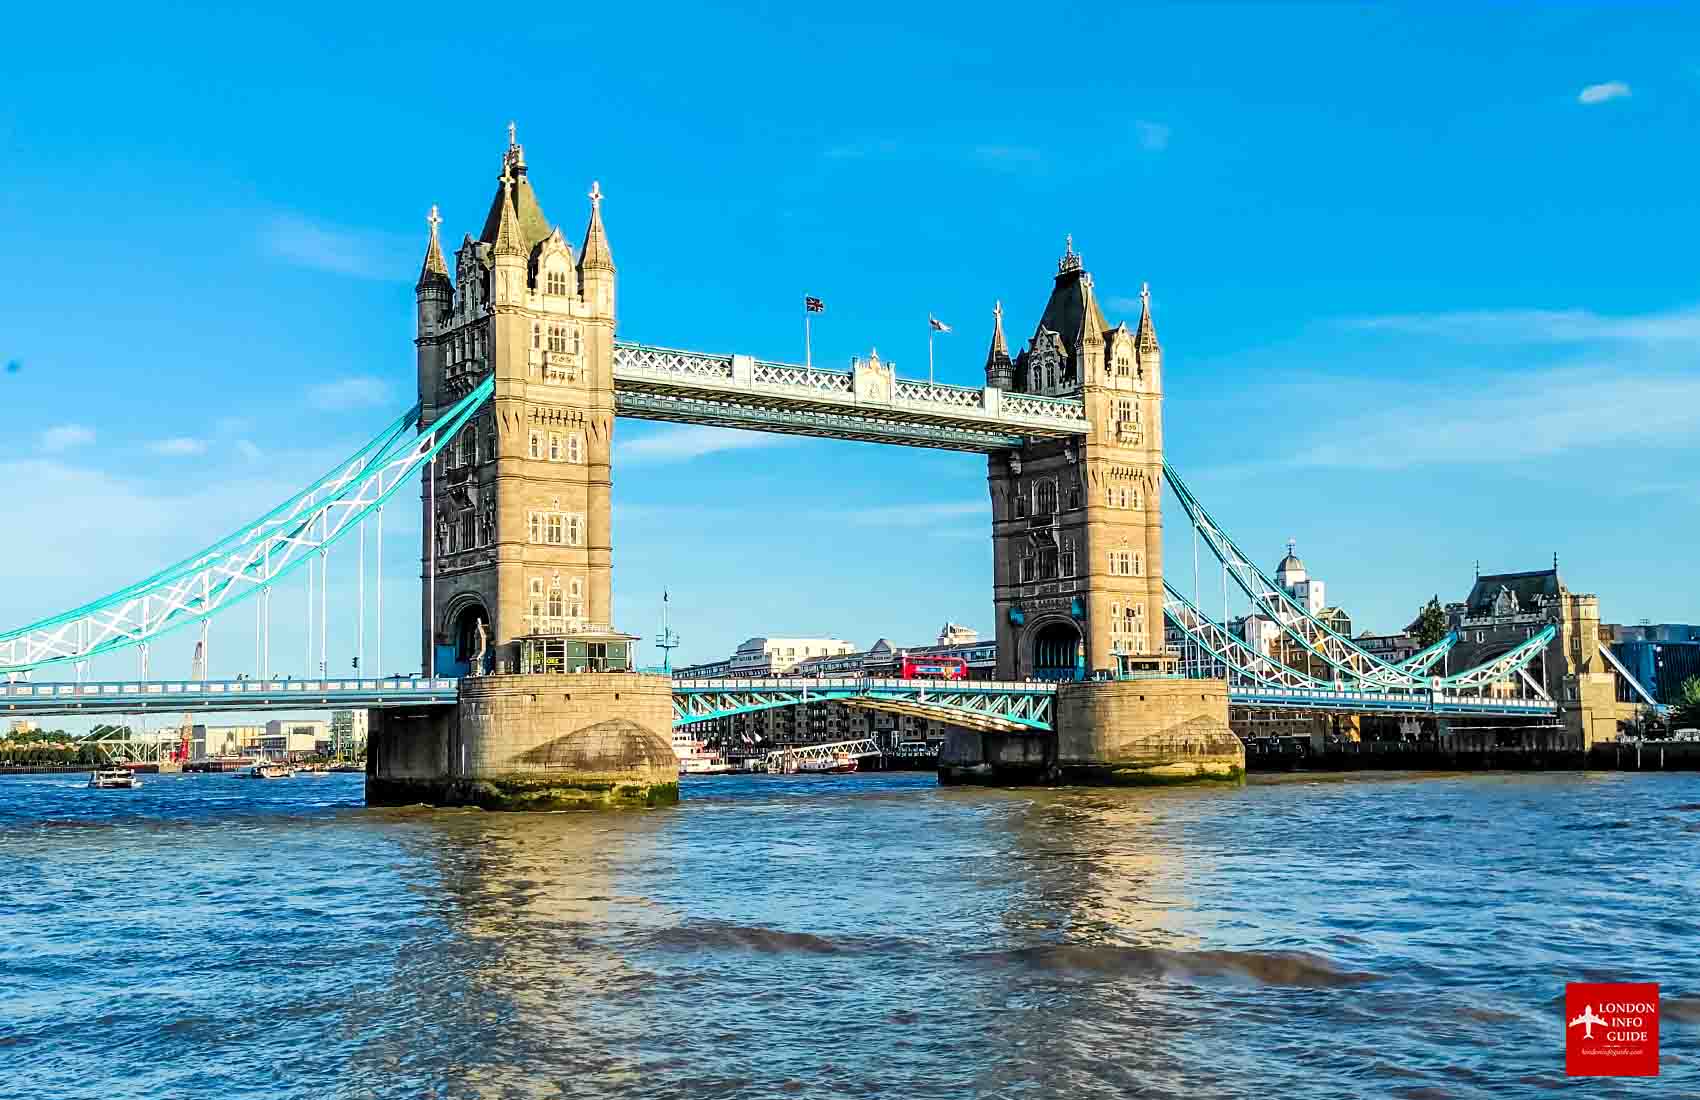 Enjoy plenty of free things to do in London from visiting iconic attractions to experiencing British history and culture. A guide to free places in London!